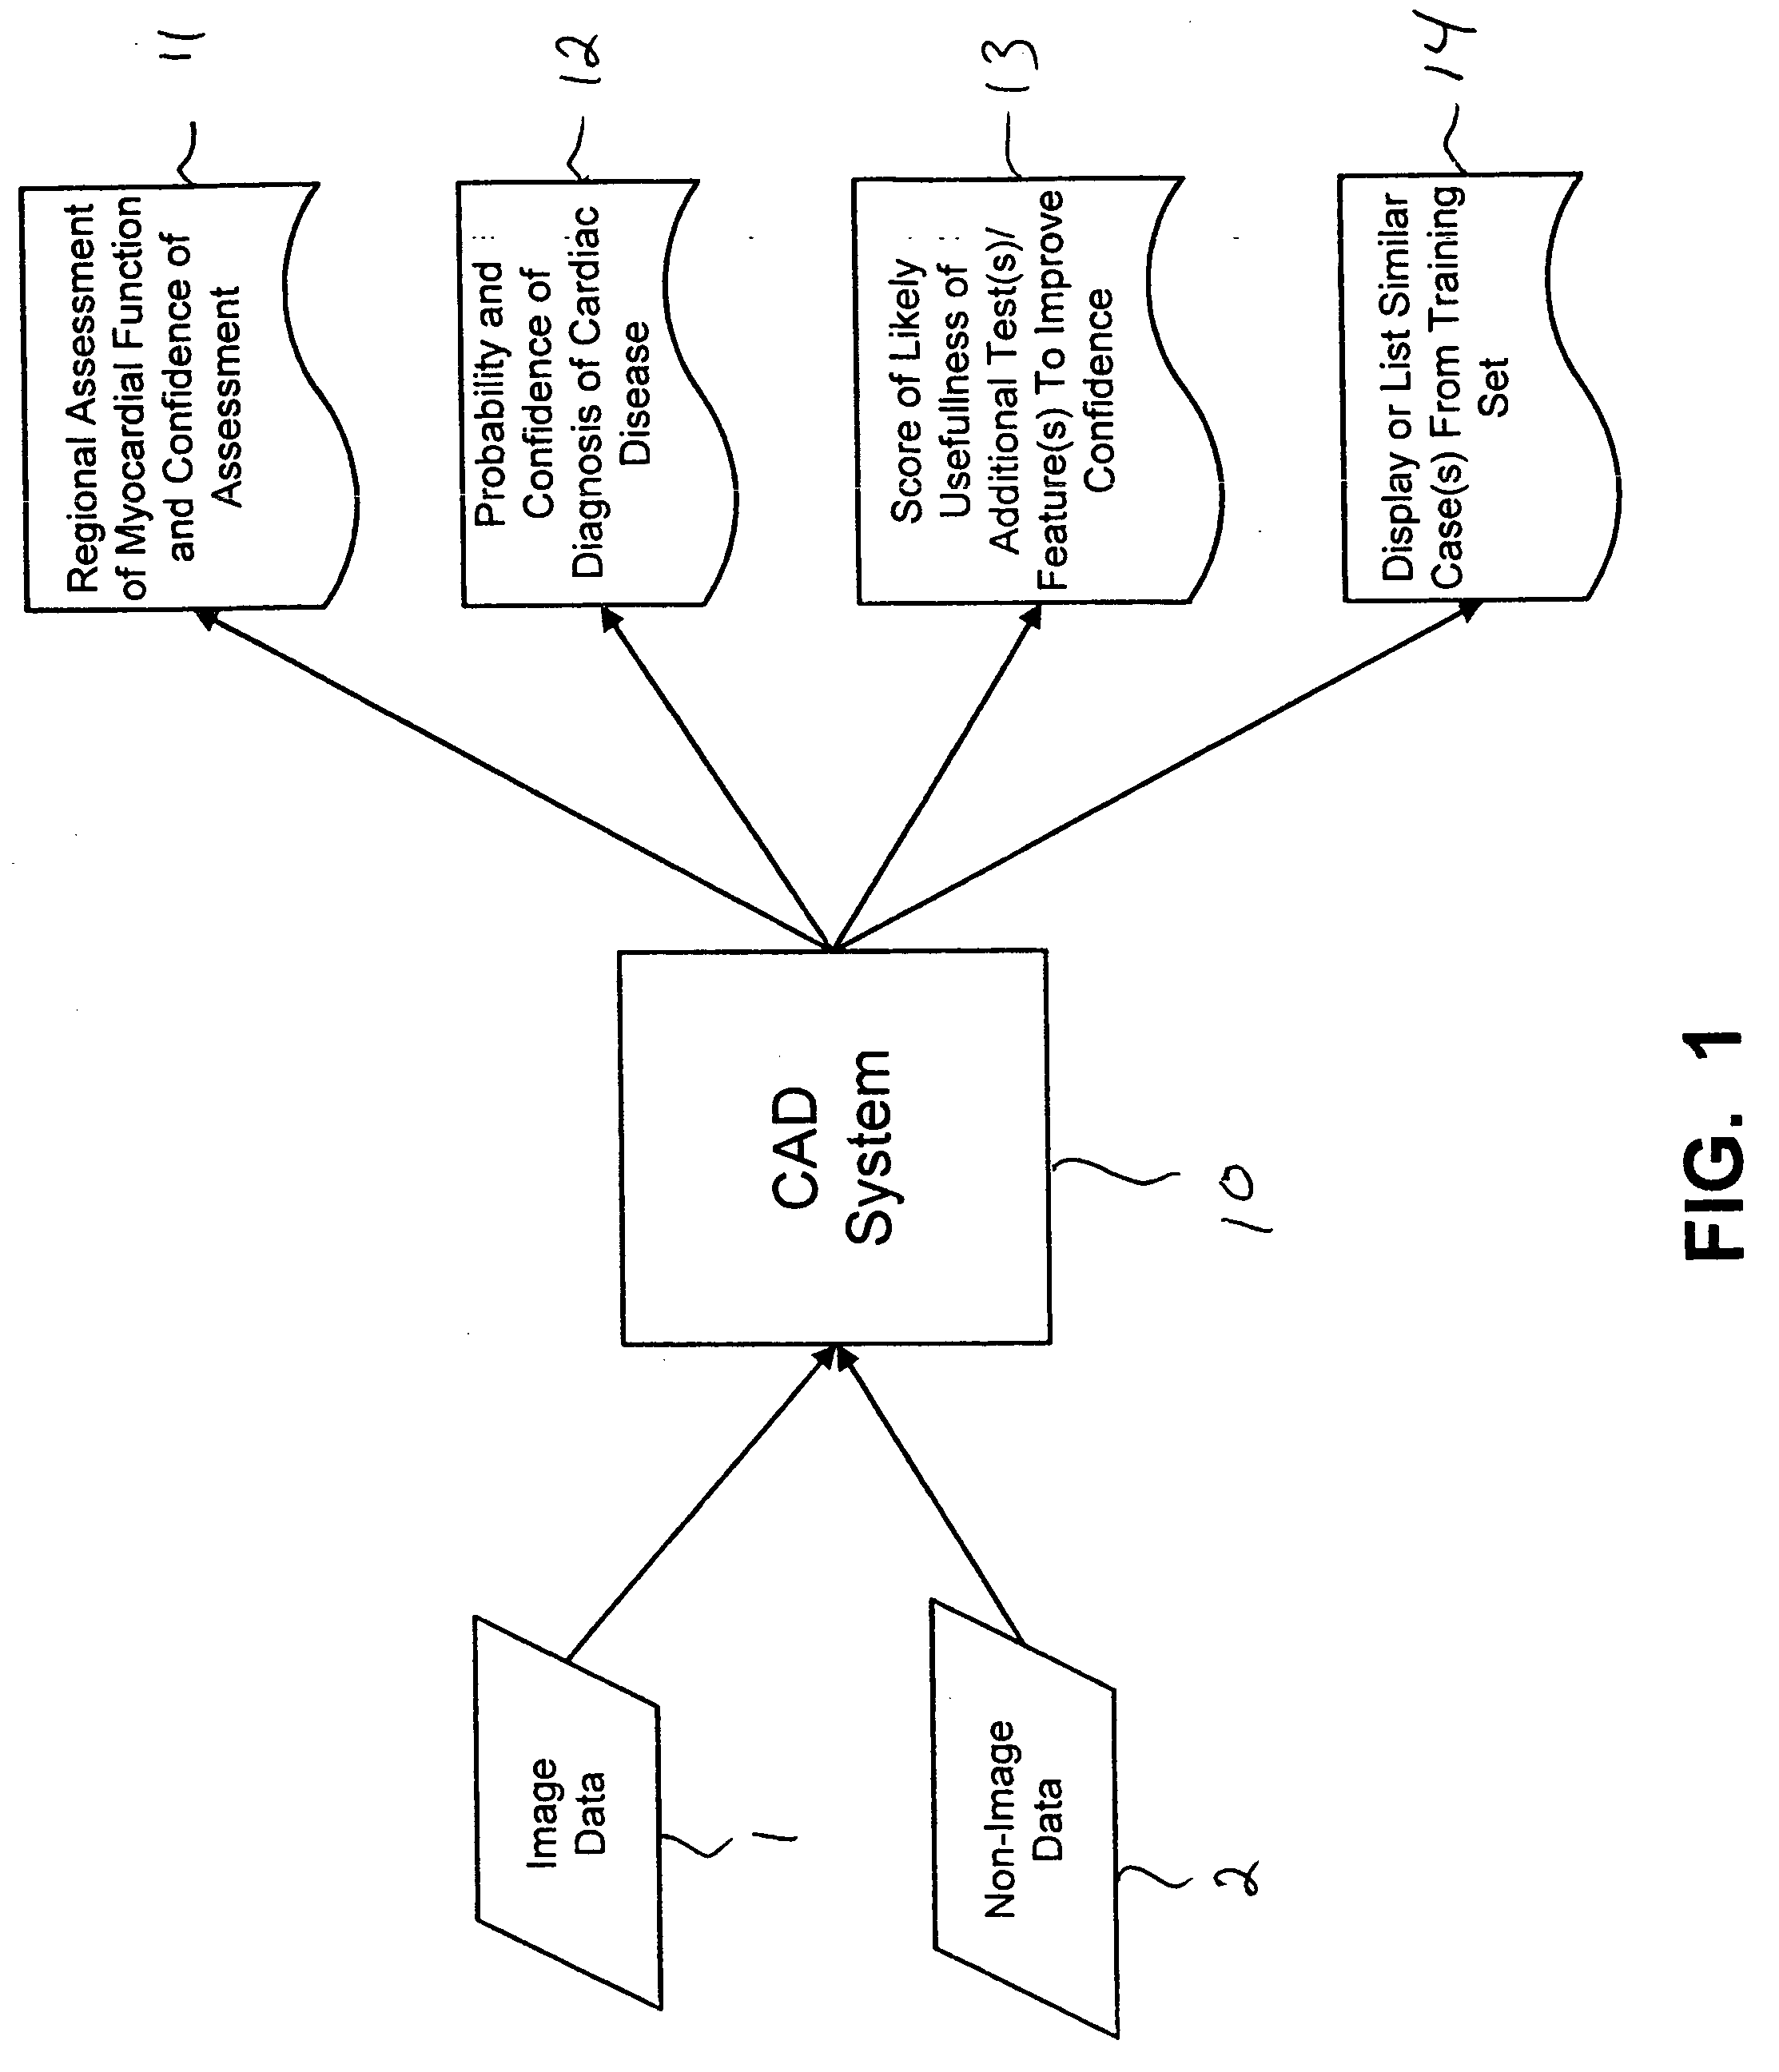 Systems and methods for providing automated regional myocardial assessment for cardiac imaging